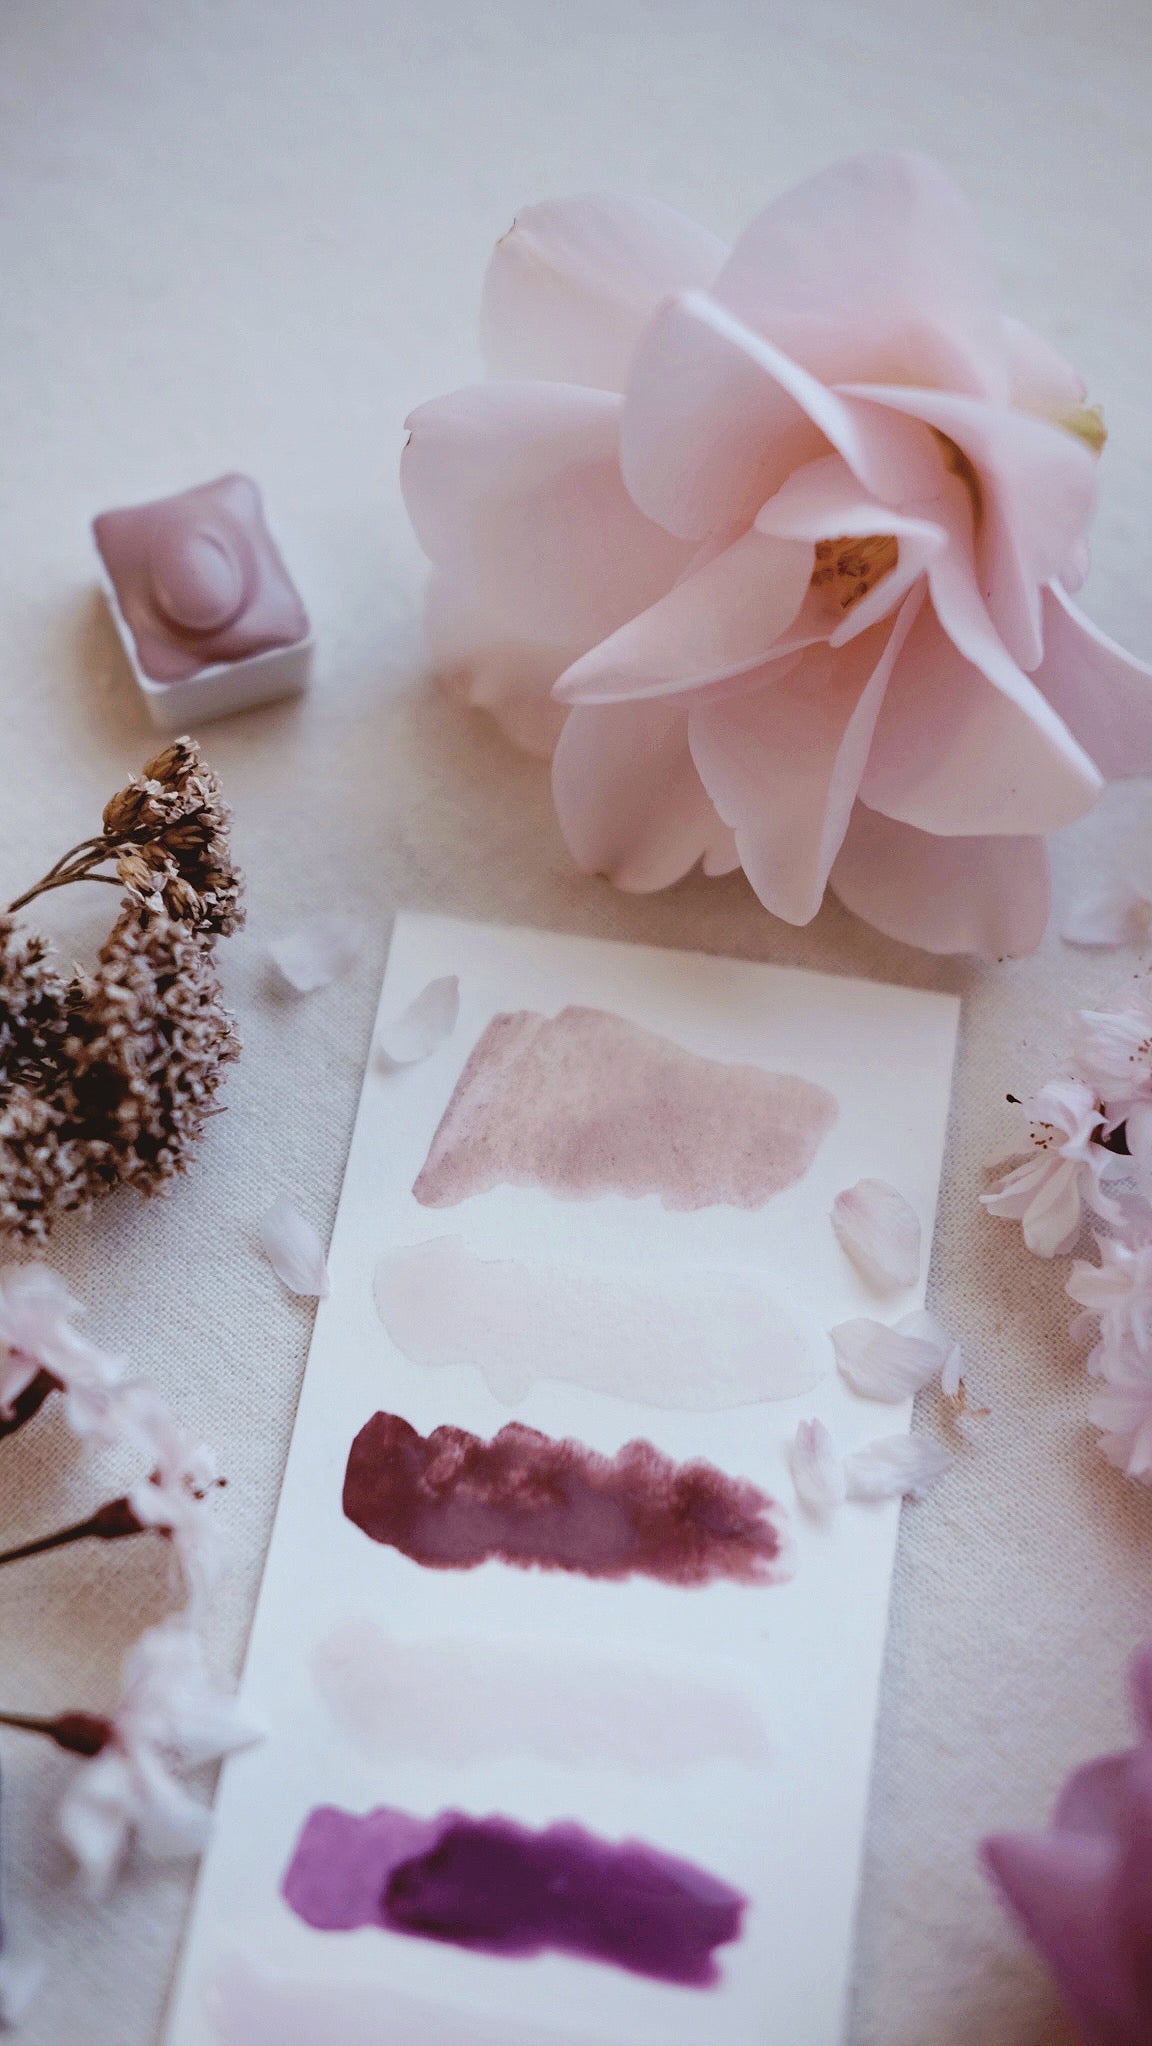 RESERVE for Emily + Custom Spring Blossom + Limited edition gemstone watercolor palette